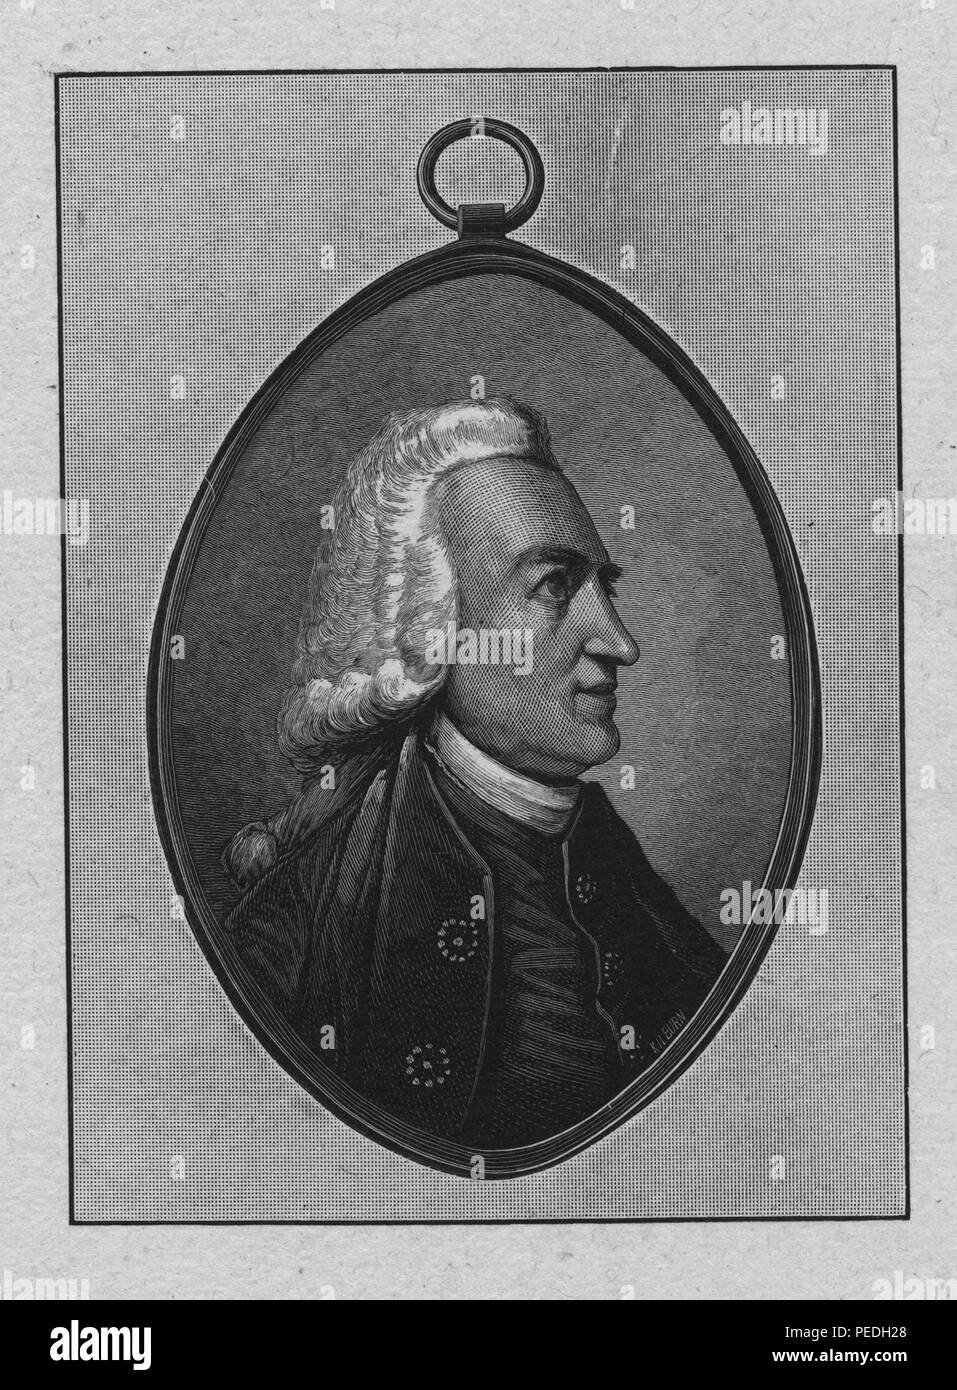 Engraved portrait of James Bowdoin, political leader whose writings and actions shaped public opinion on the colonies and the American Revolution, also served as the Governor of Massachusetts, 1880. From the New York Public Library. () Stock Photo